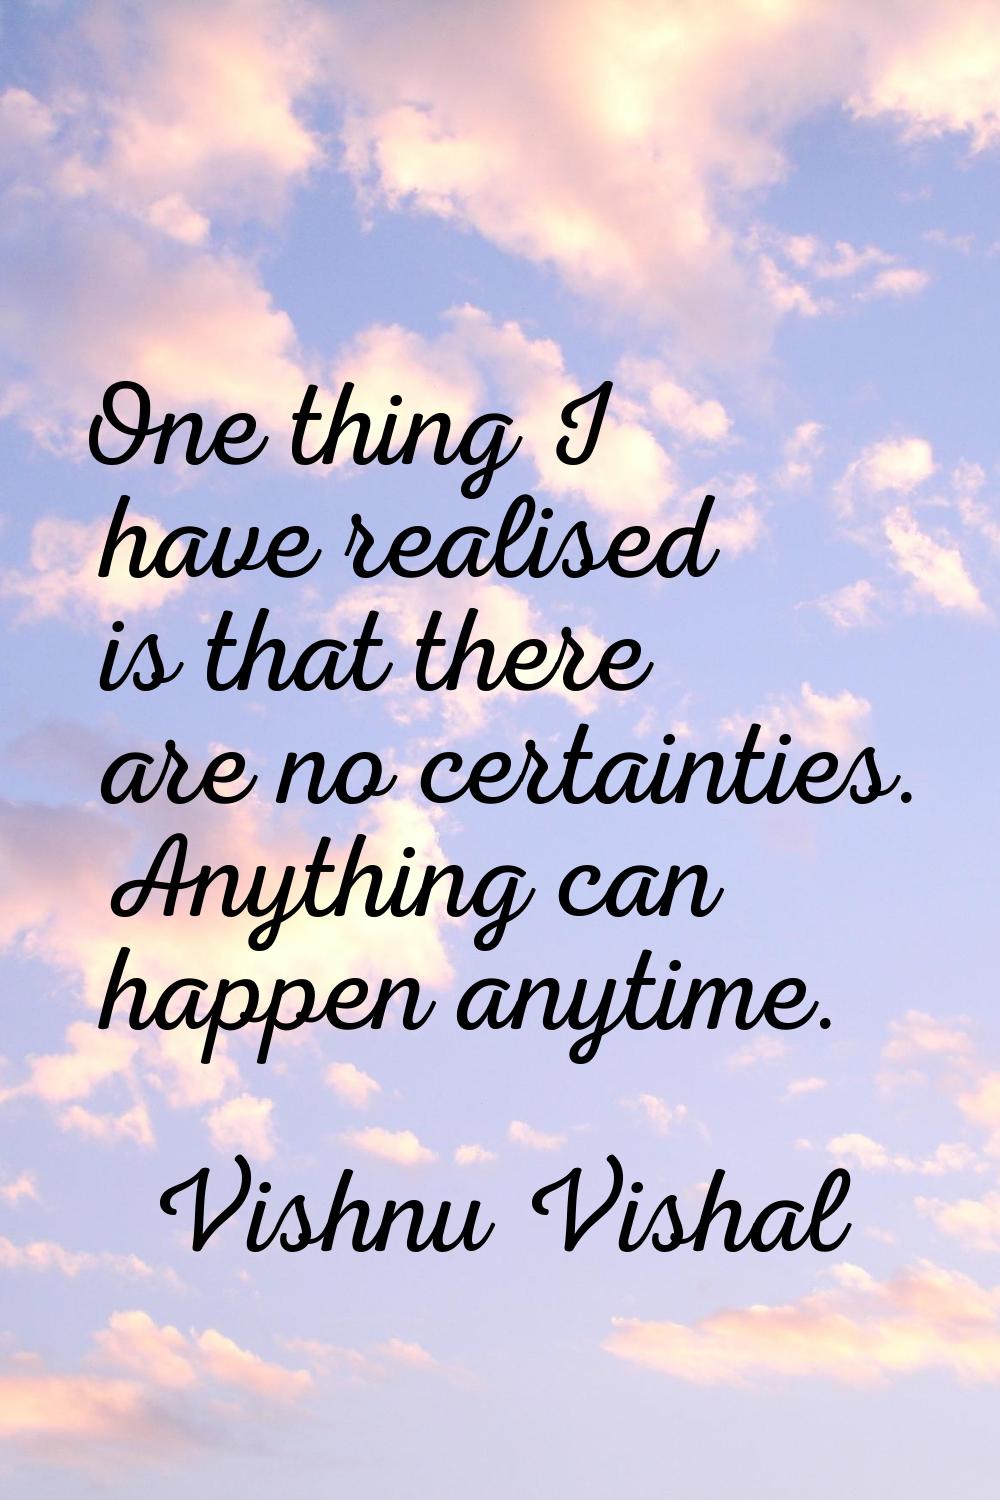 One thing I have realised is that there are no certainties. Anything can happen anytime.